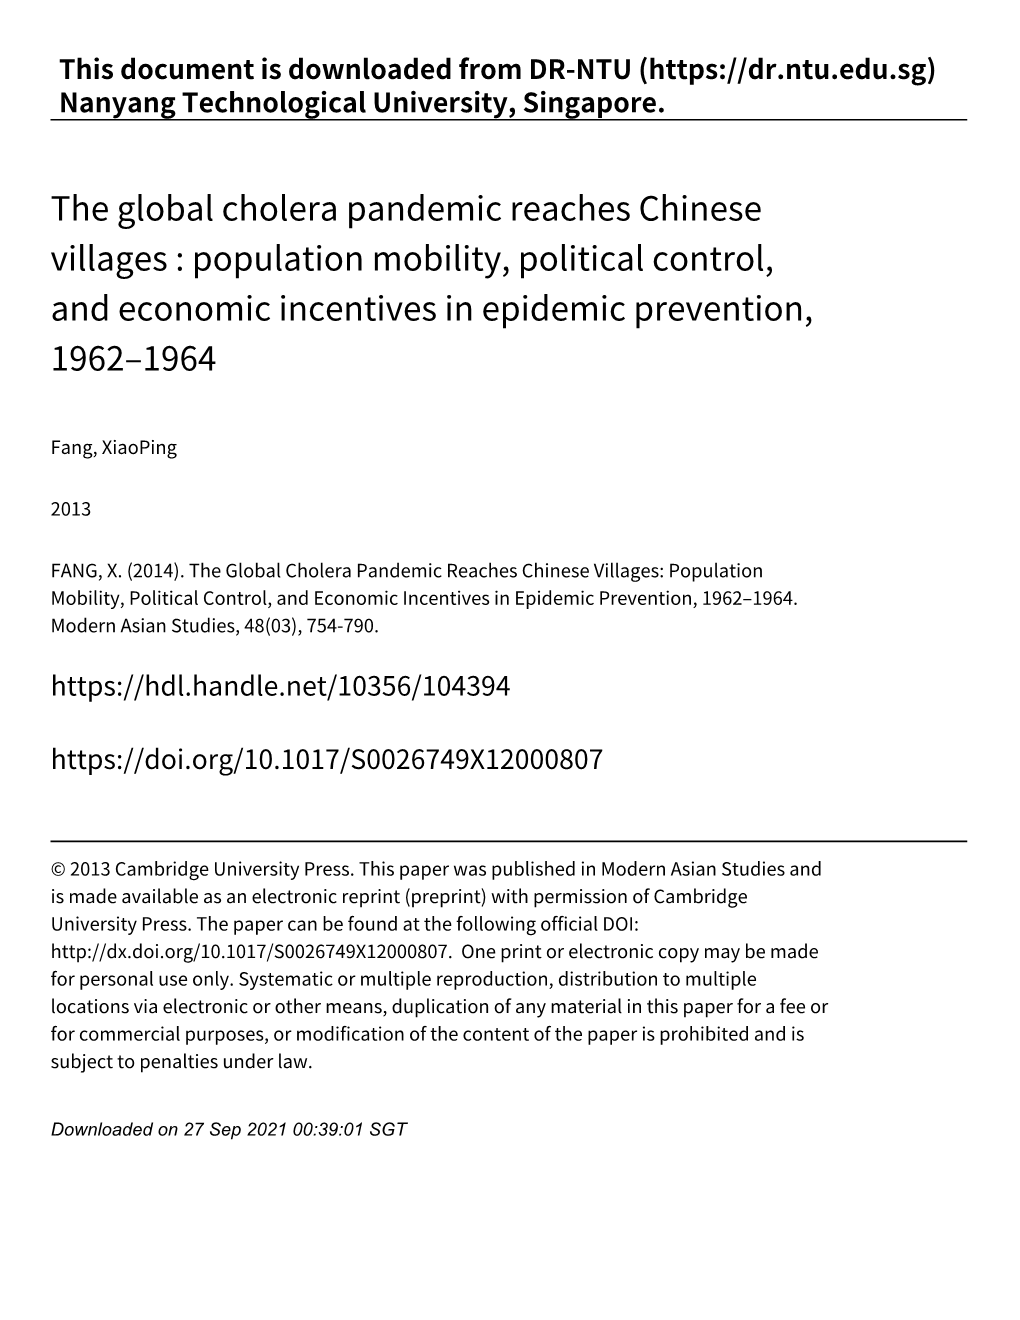 The Global Cholera Pandemic Reaches Chinese Villages : Population Mobility, Political Control, and Economic Incentives in Epidemic Prevention, 1962–1964